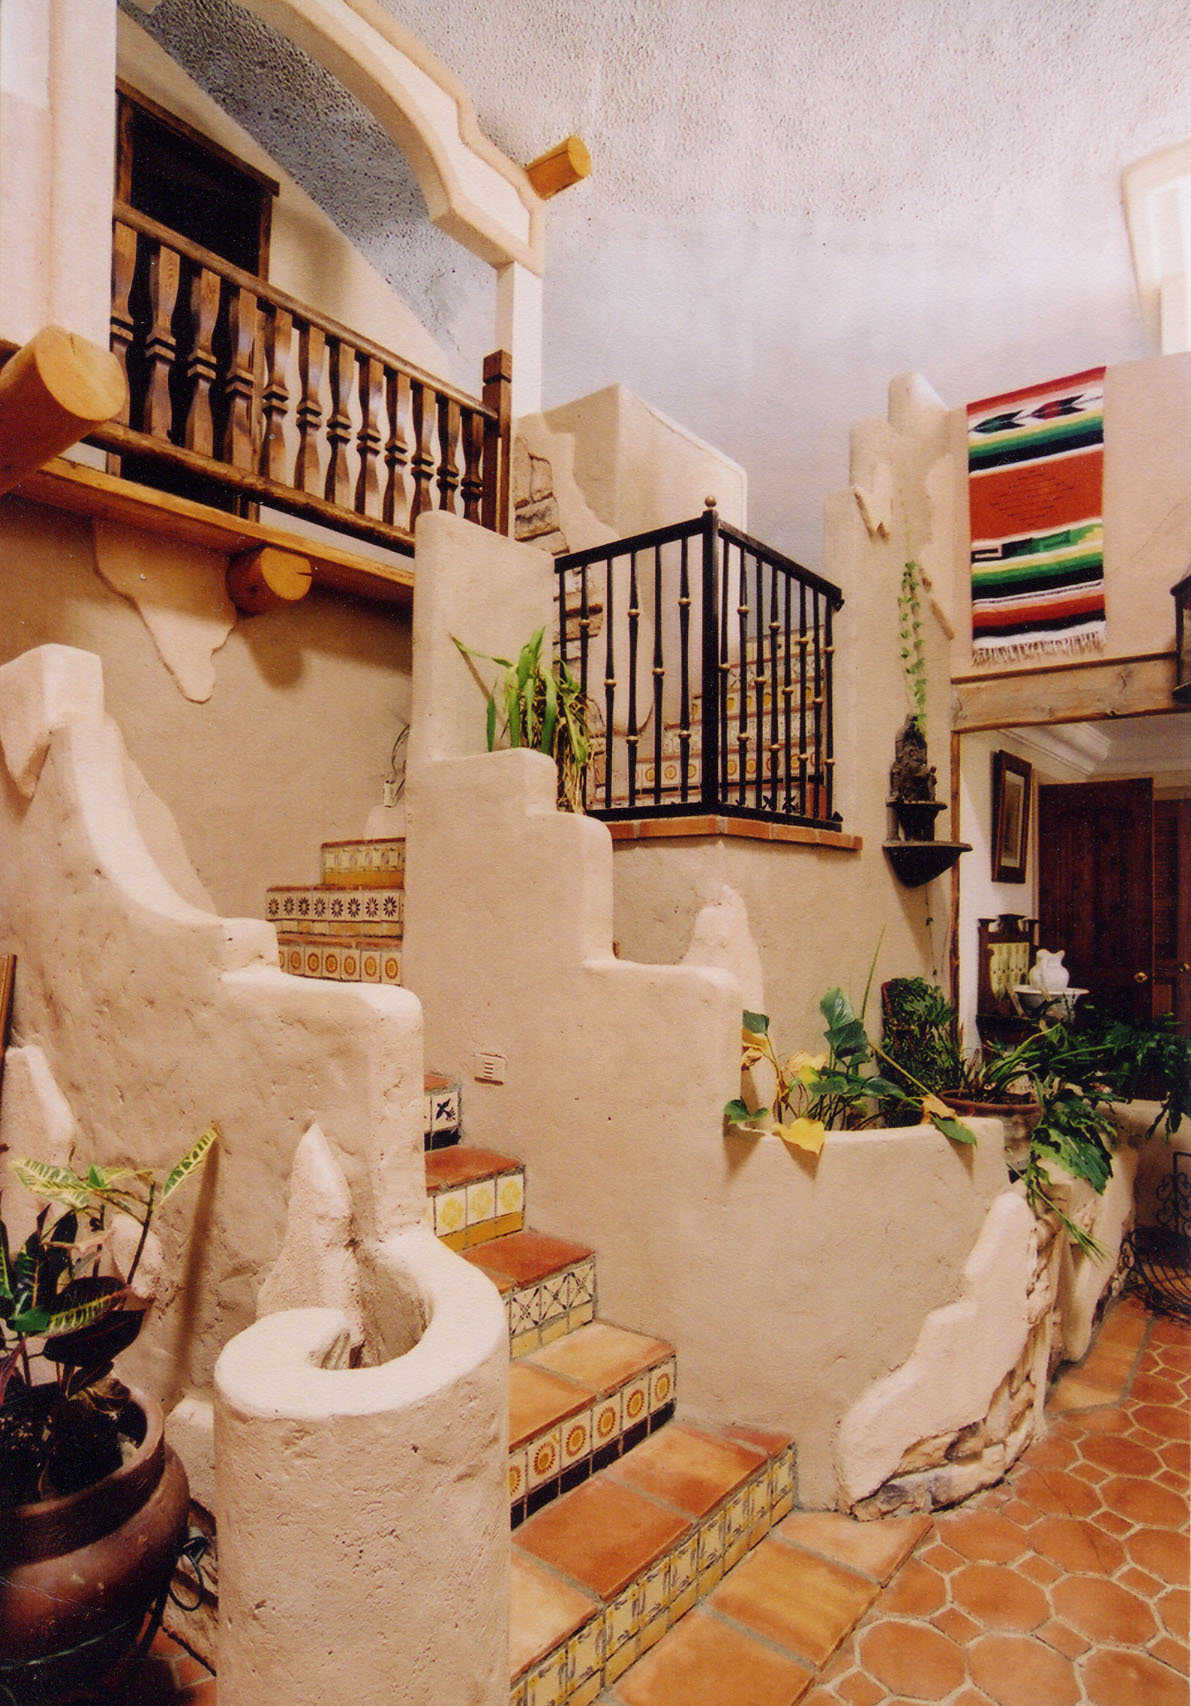 Stairway — Its Mosaic tiles lead to the upper level living areas.